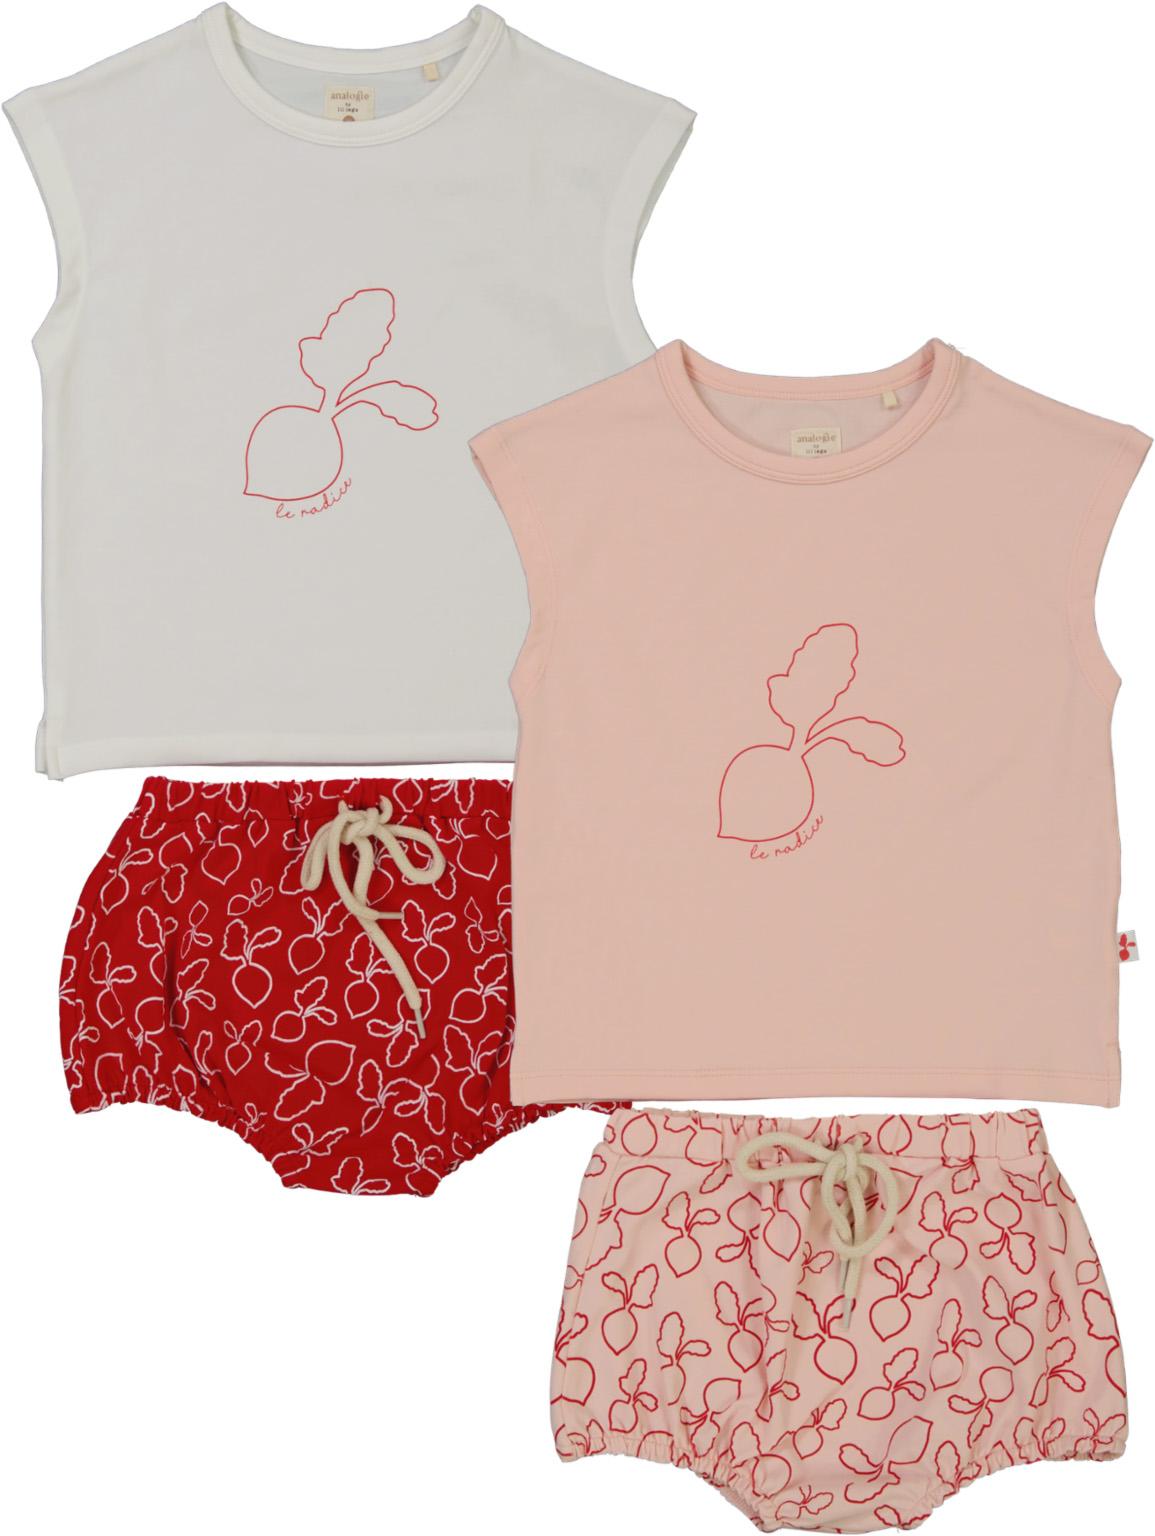 Analogie by Lil Legs Radish Collection Baby Toddler Girls Outfit